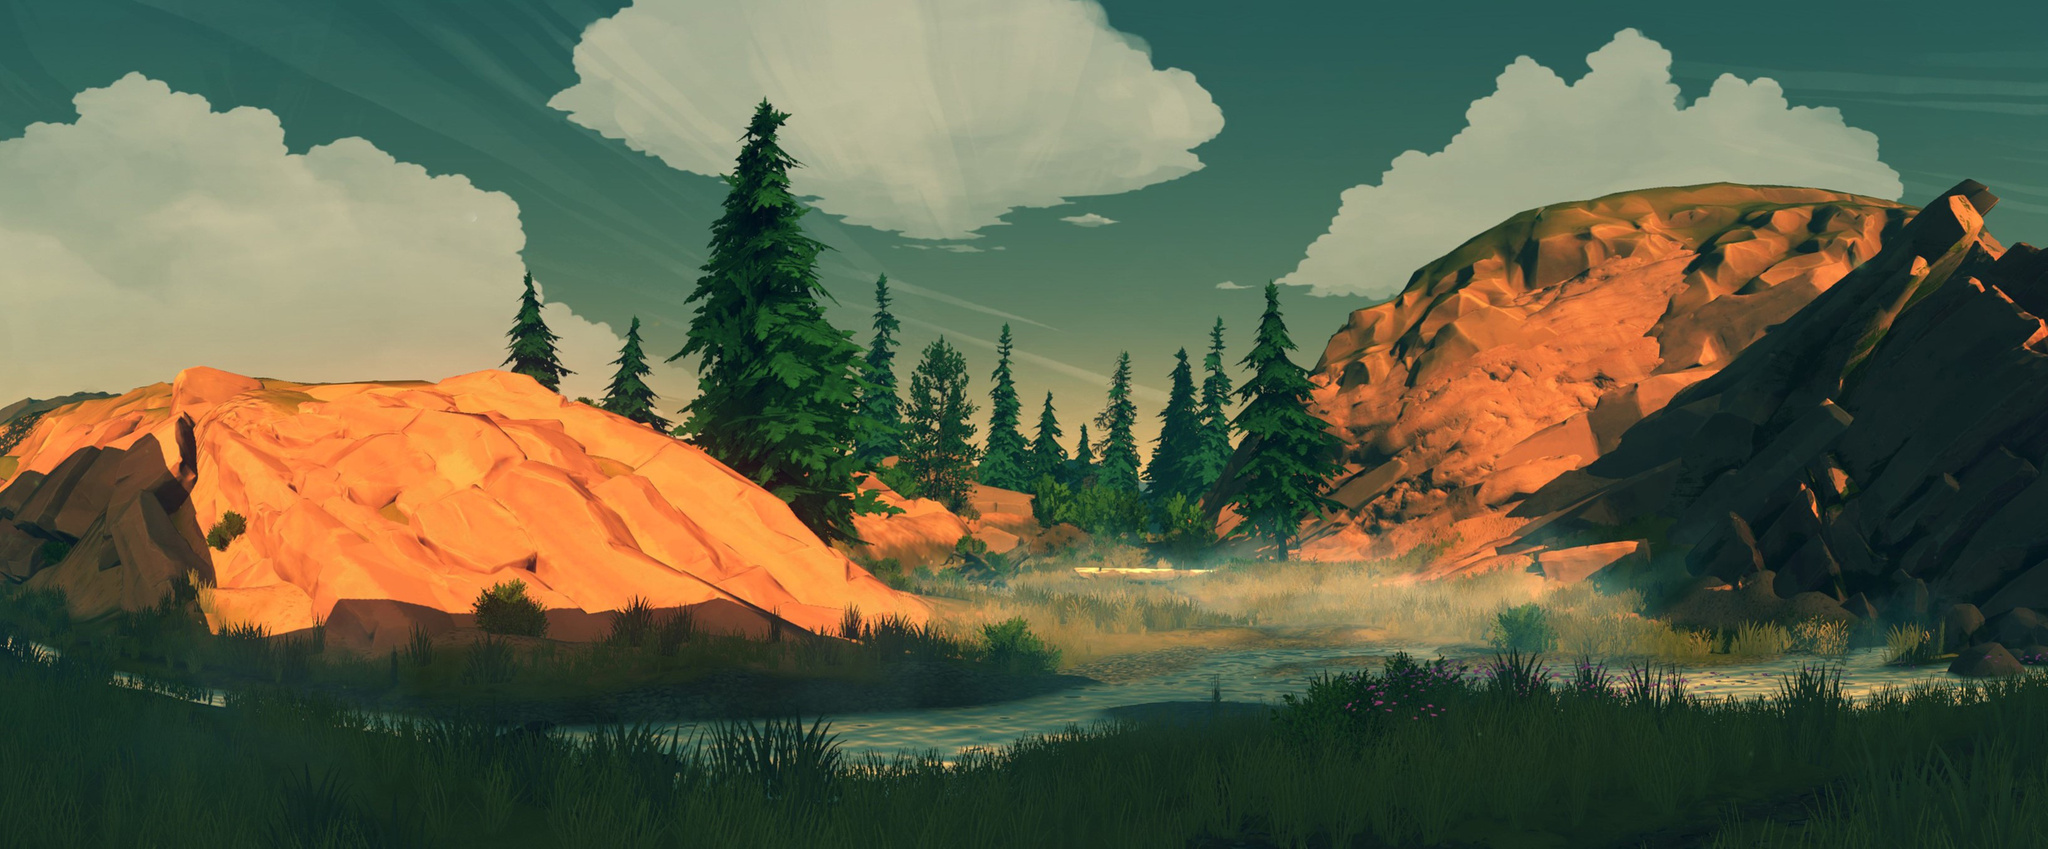 Firewatch Has Your Wallpaper Needs Covered For 2016